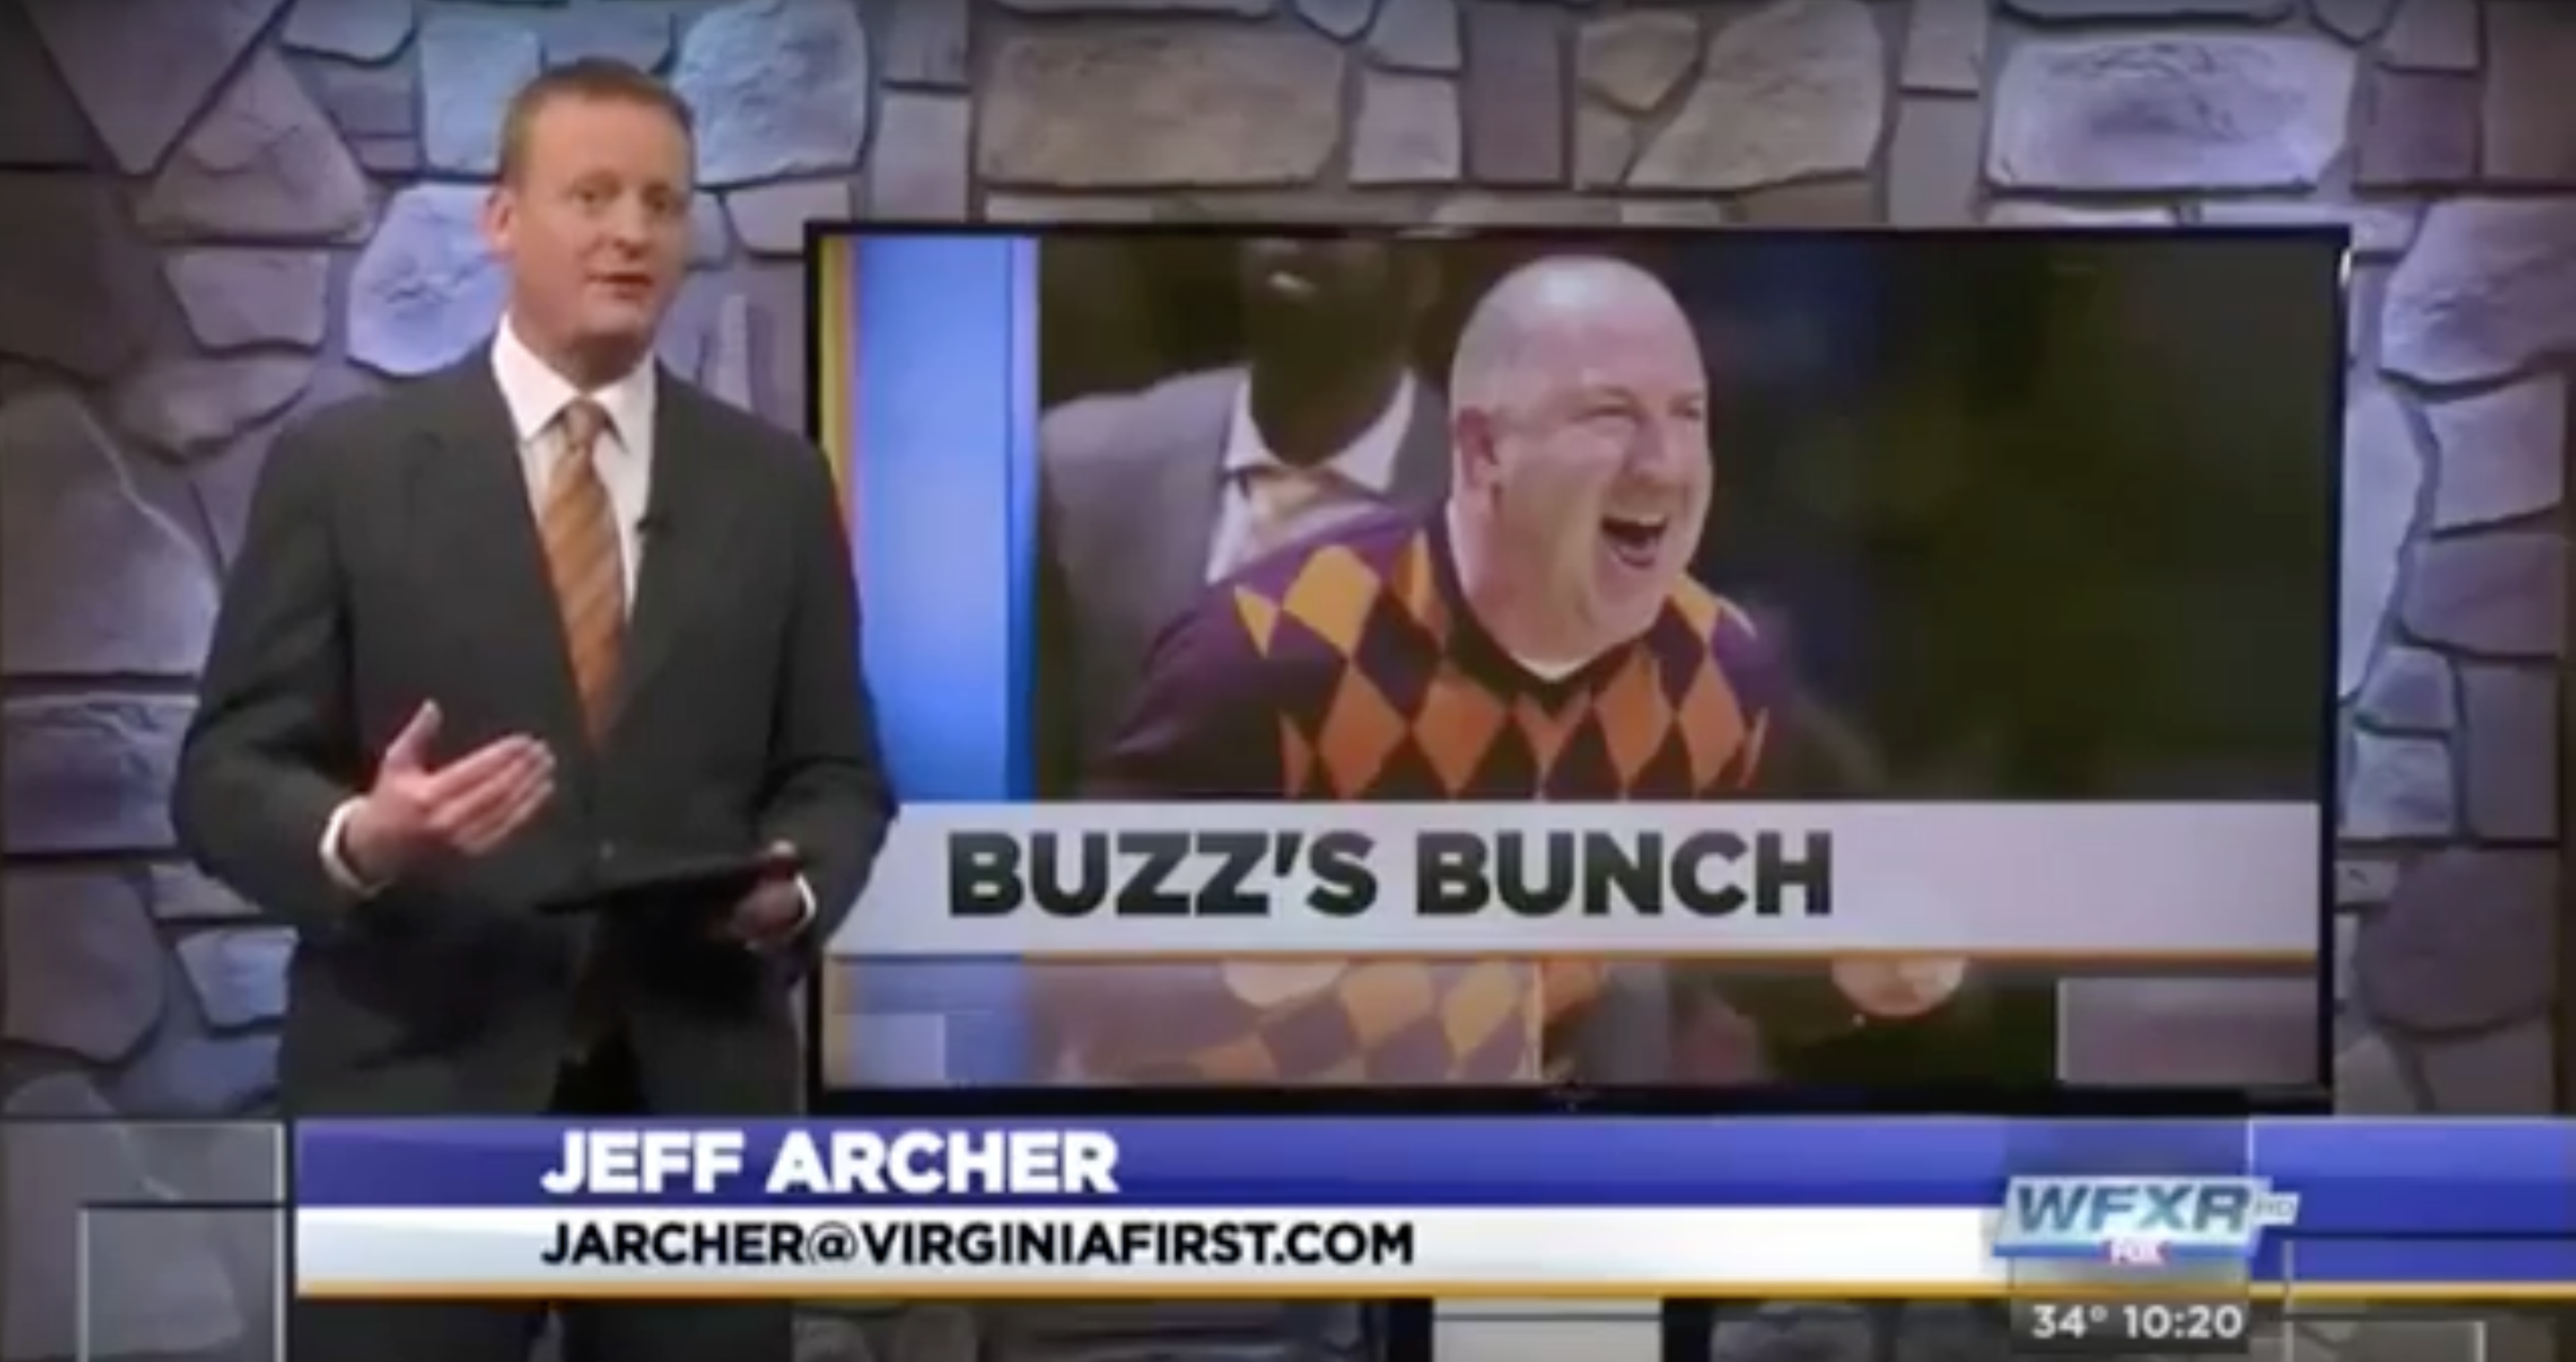 Buzz’s Bunch on Virginia First